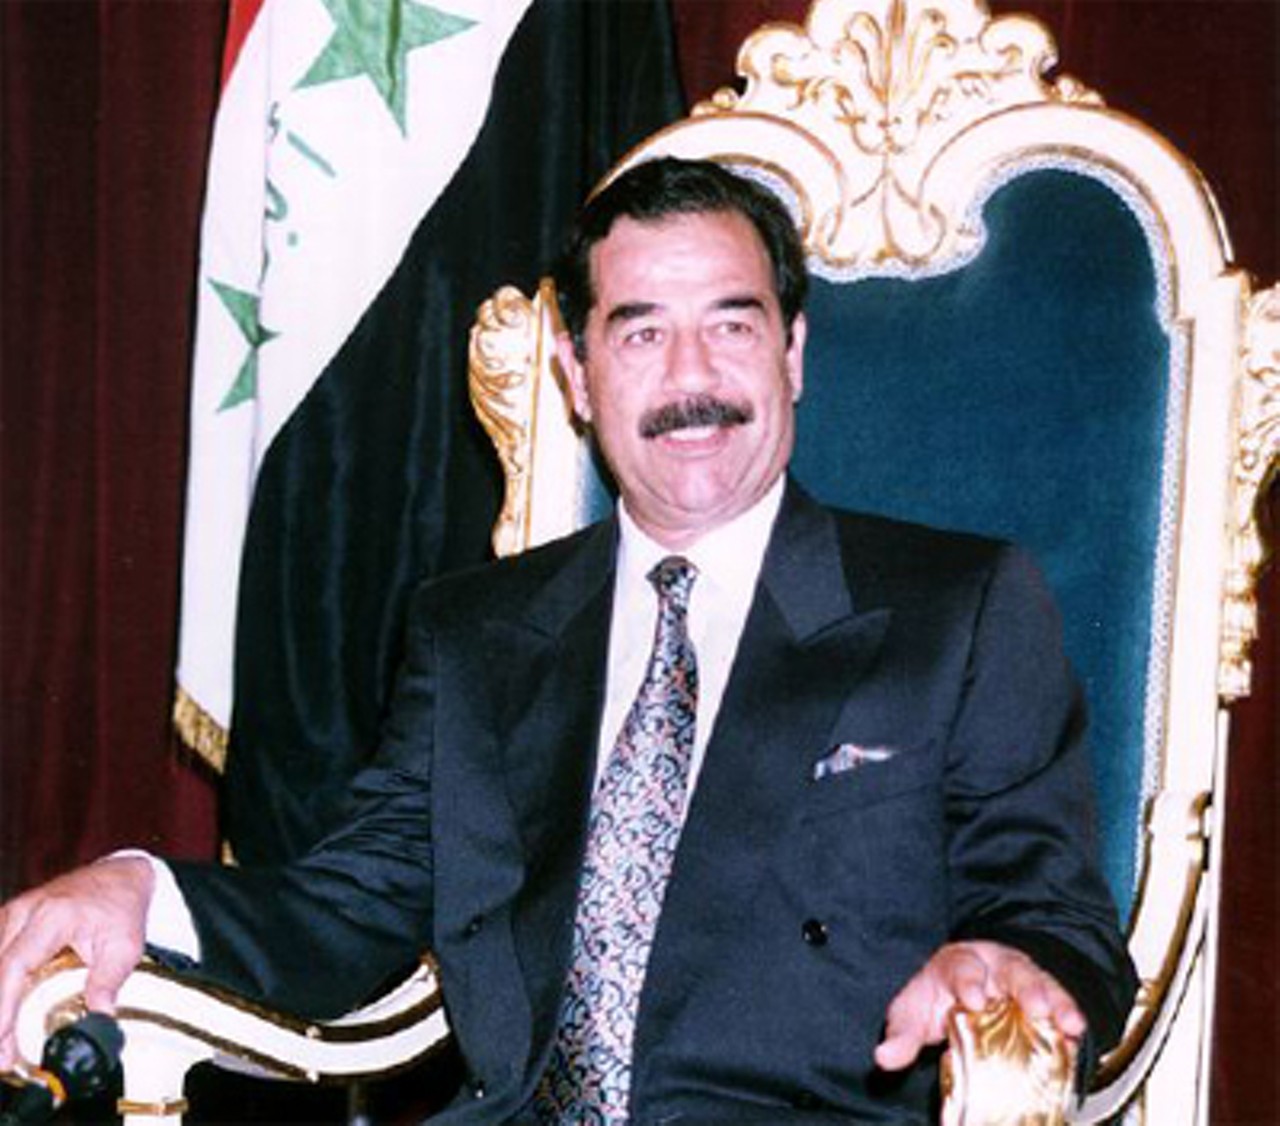 Dictators and mustaches have been connected throughout the years. Here's Saddam Hussein.